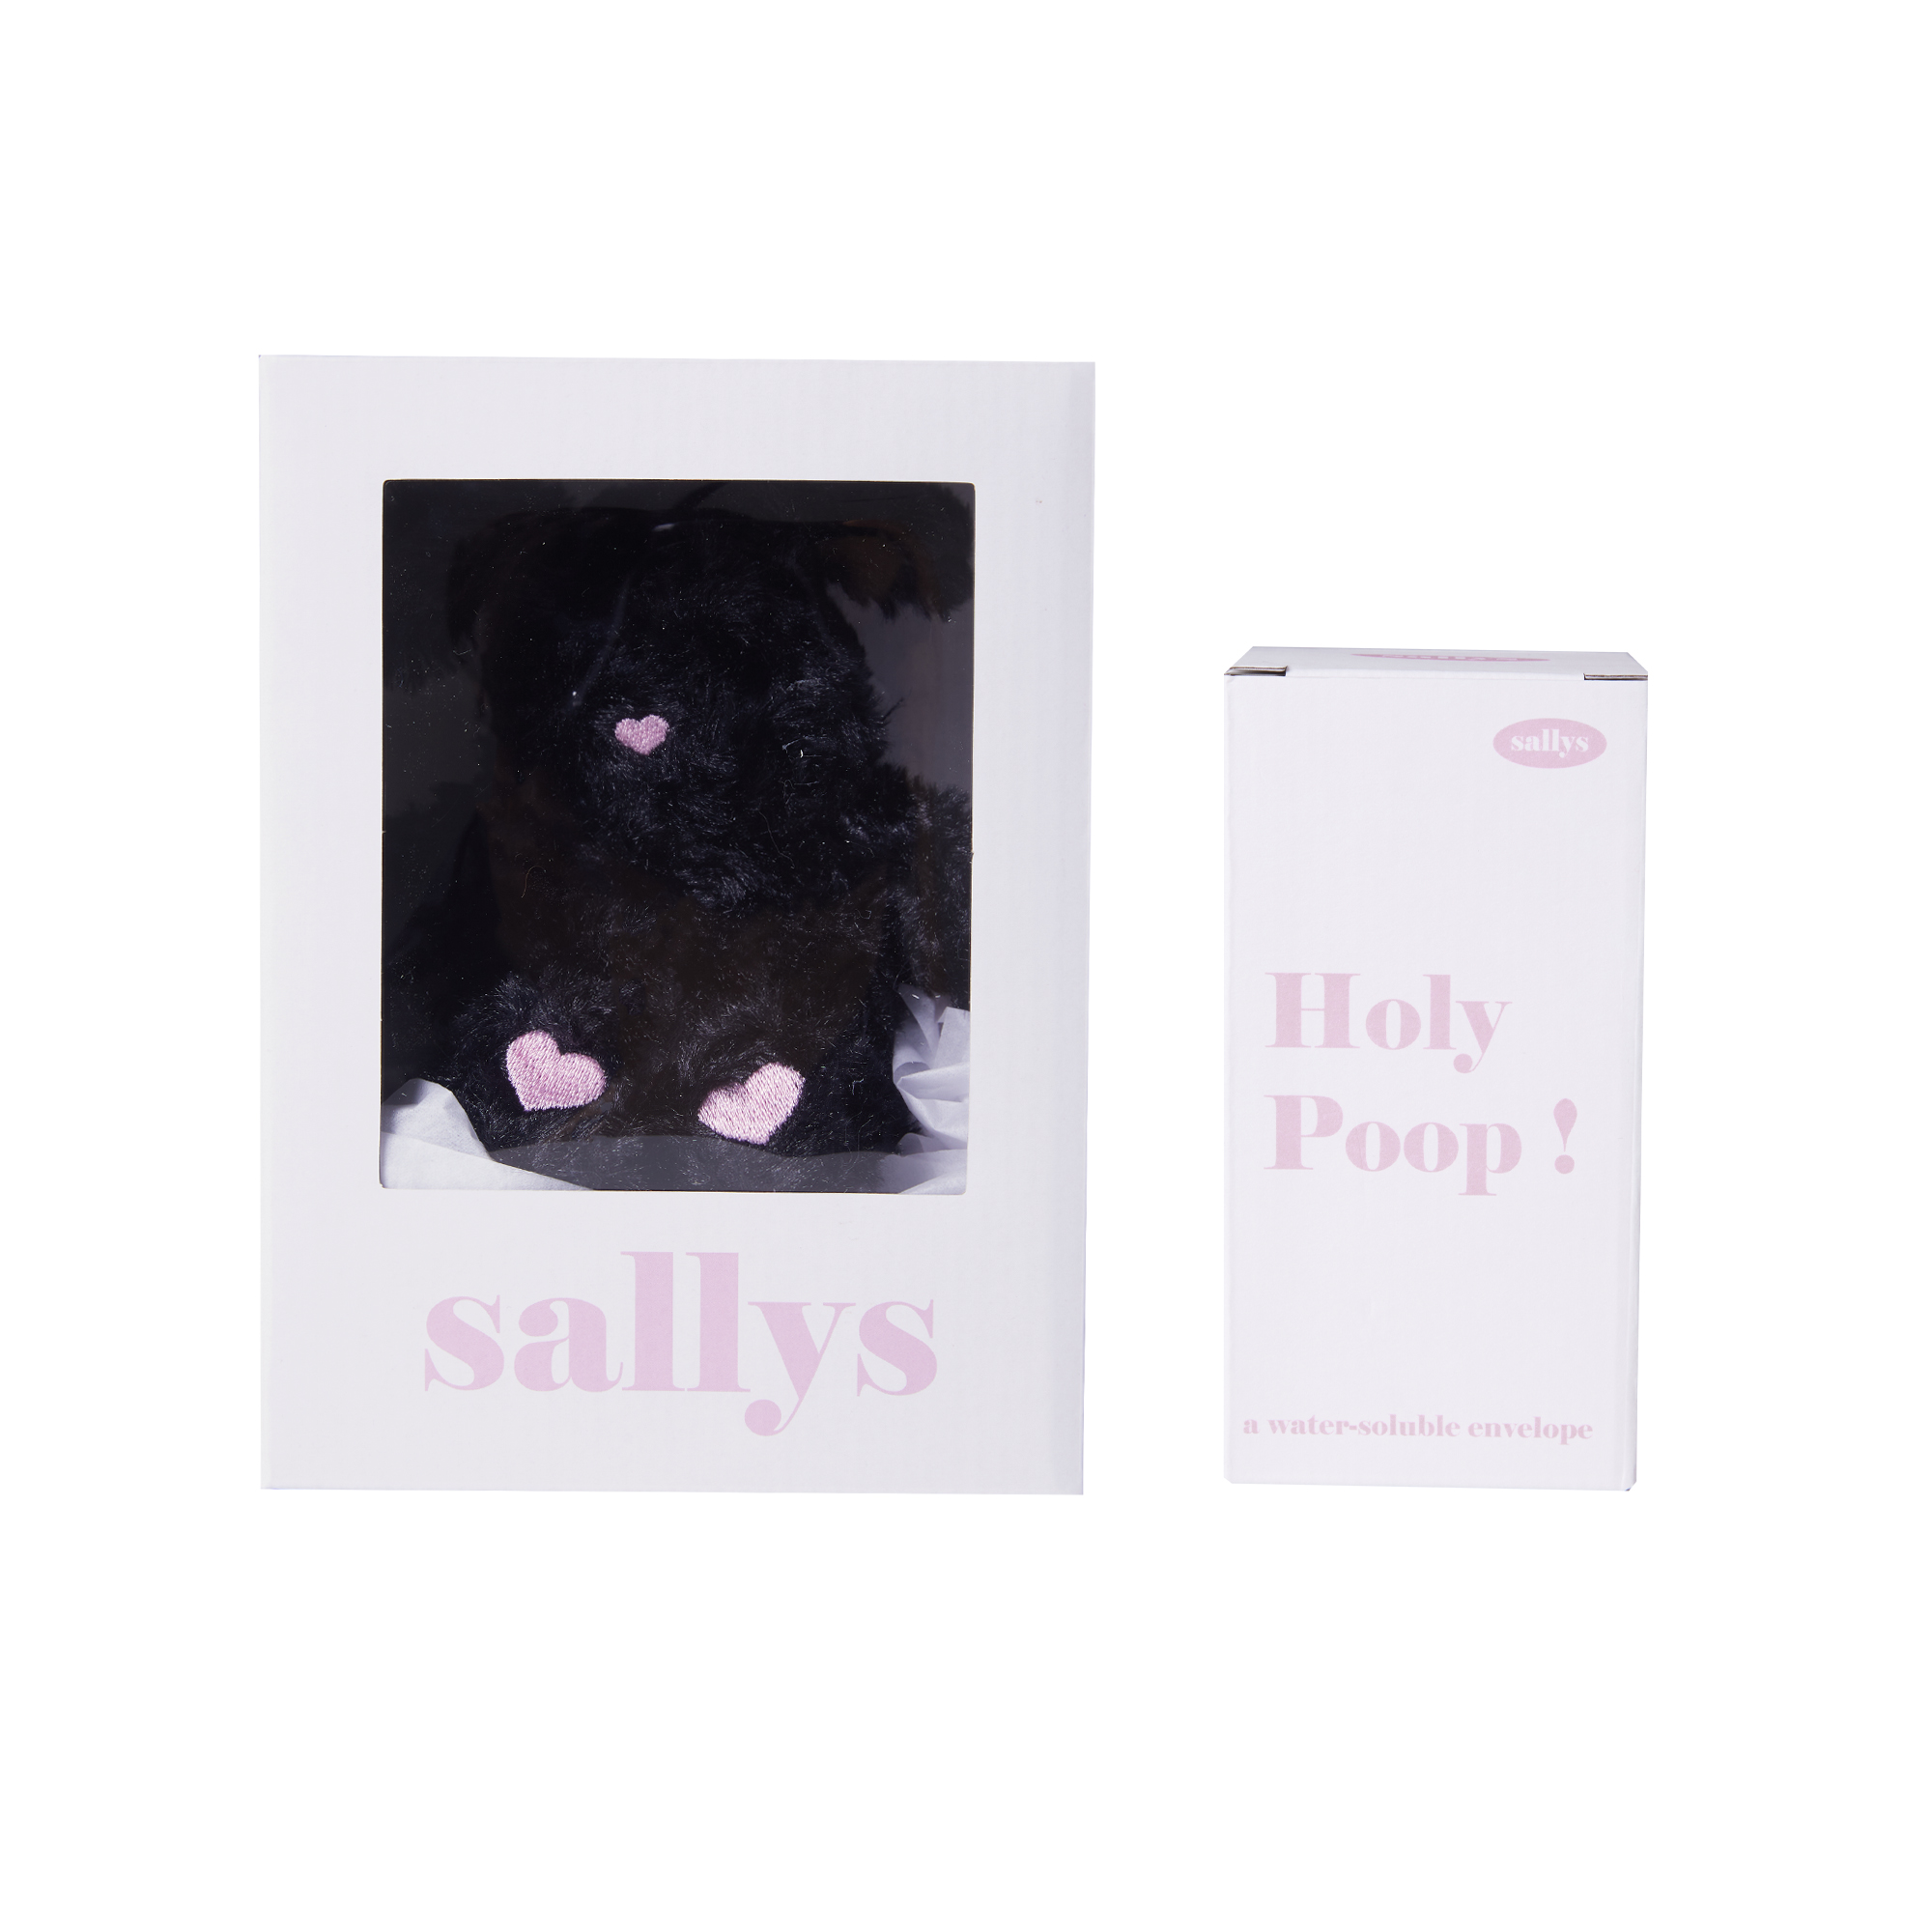 SALLY SPECIAL PACKAGE (BLACK)